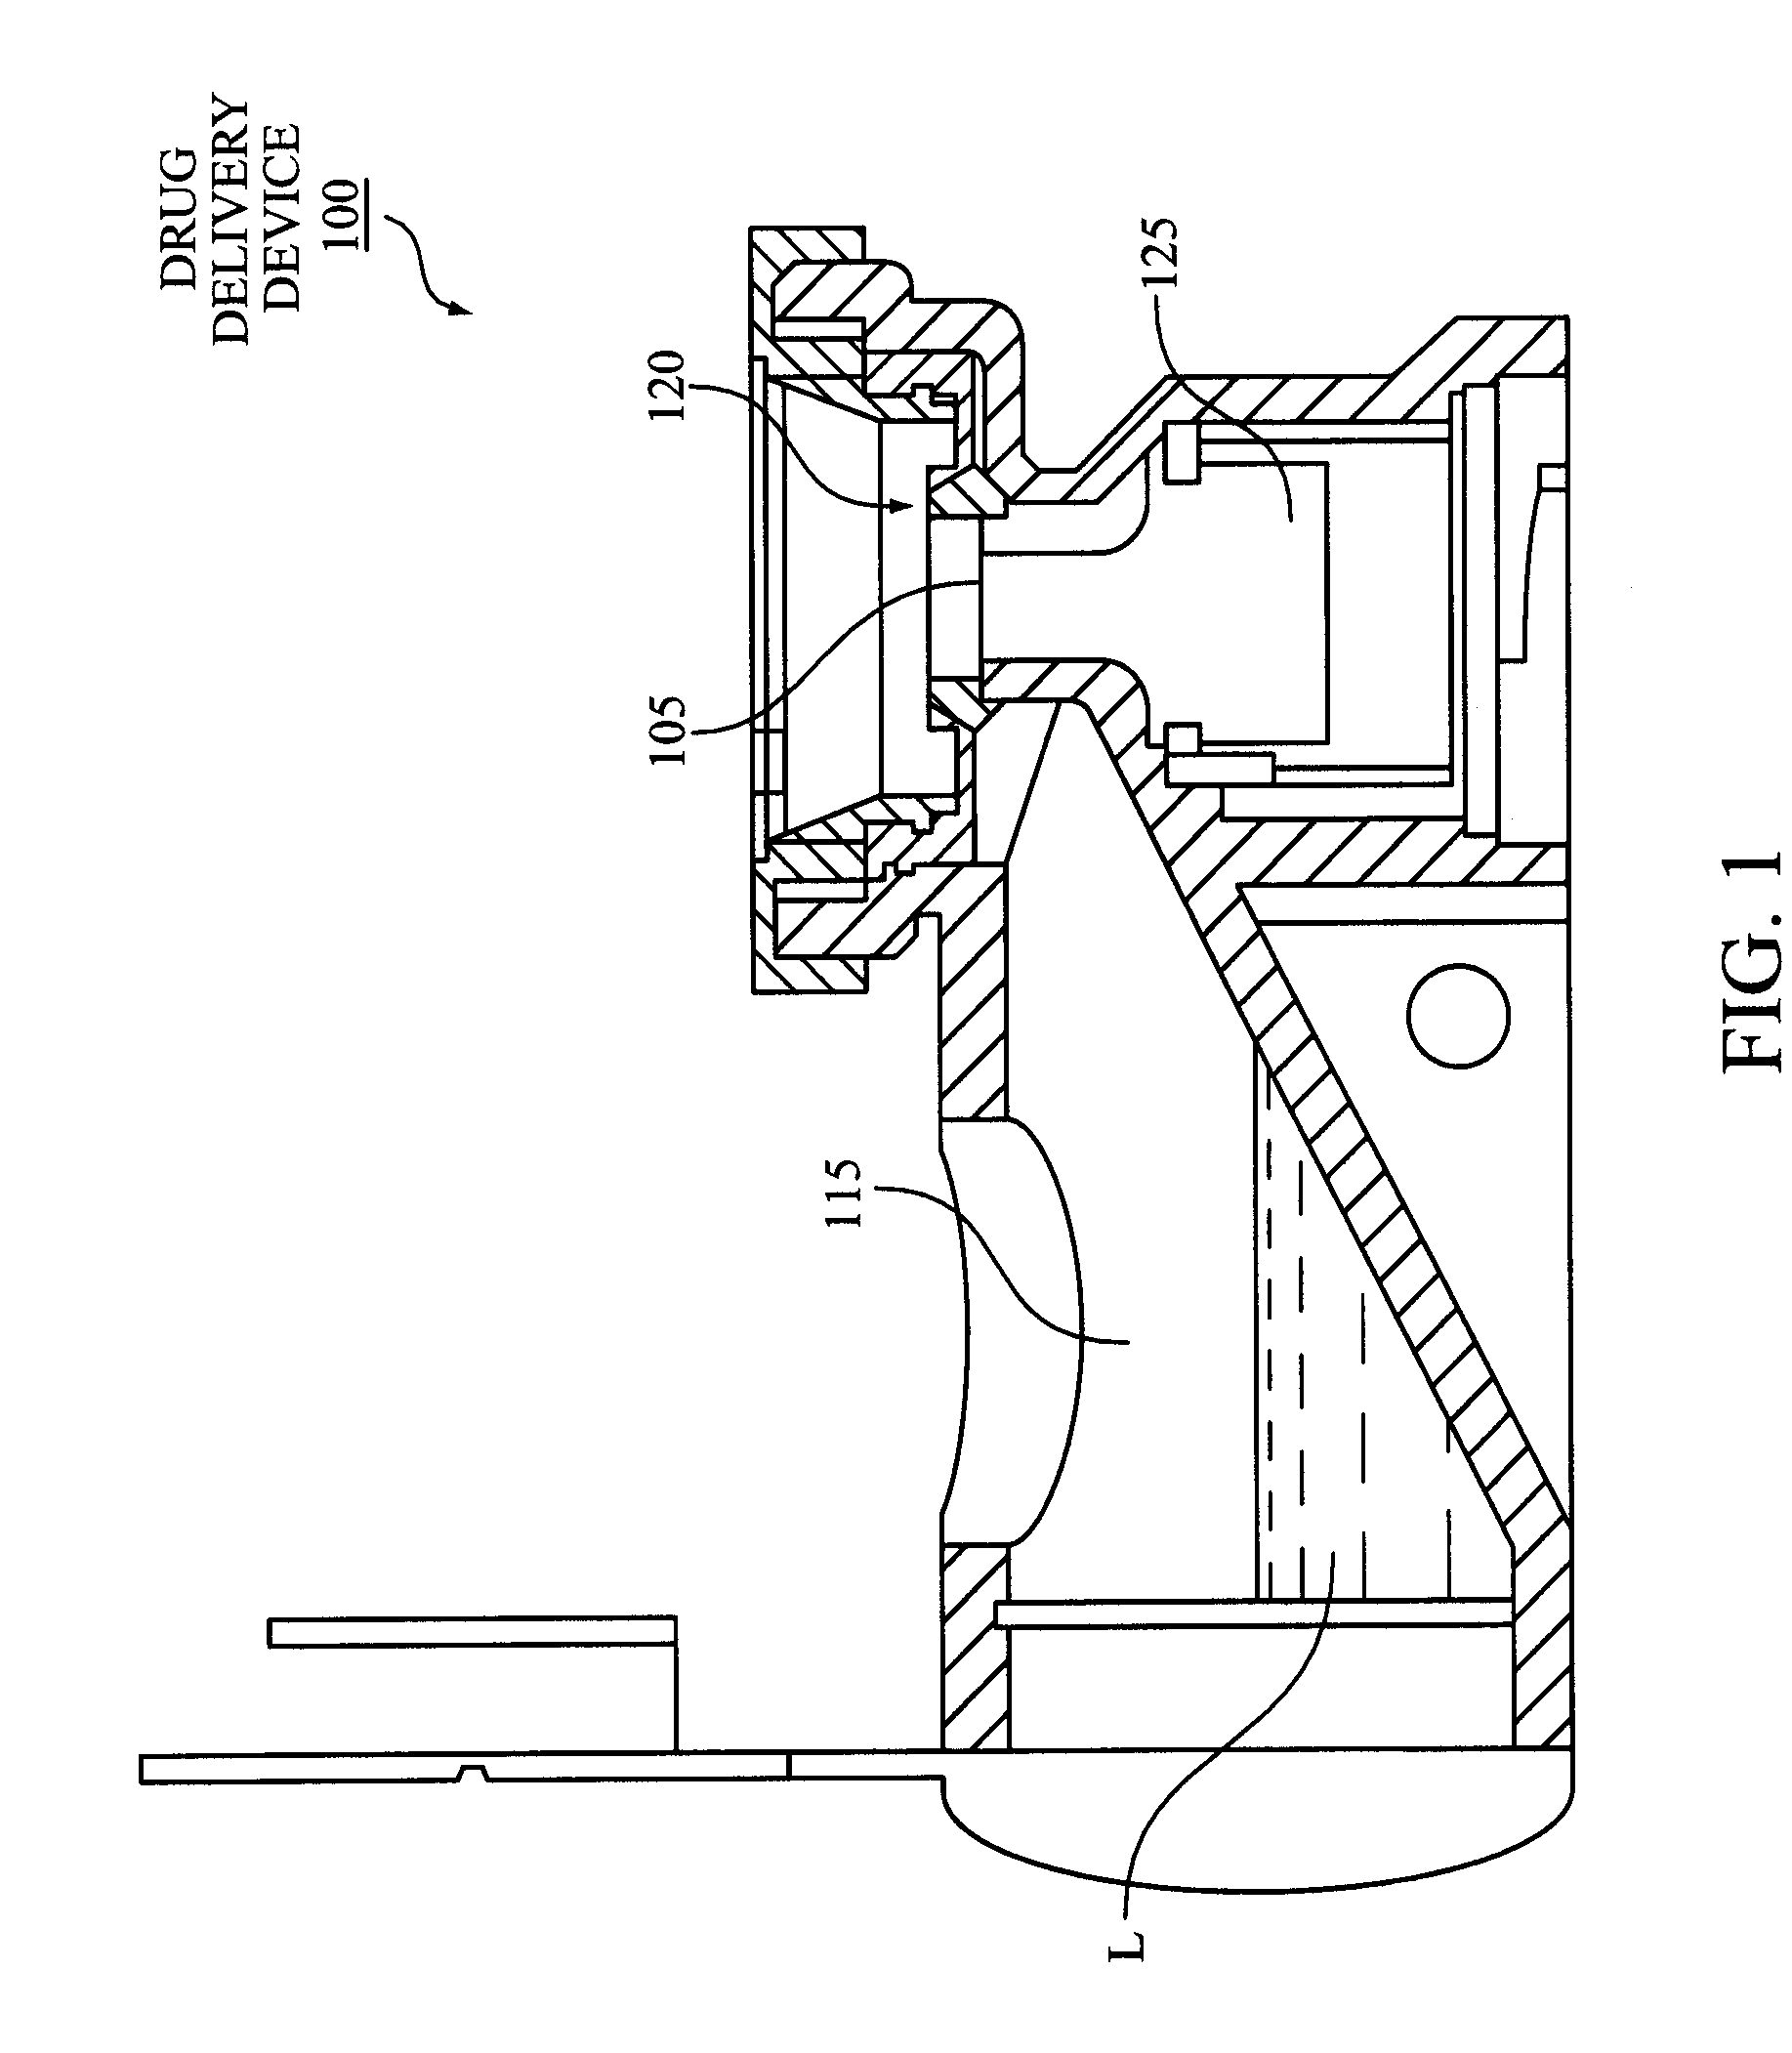 Apparatus and Method for Maintaining Consistency for Aerosol Drug Delivery Treatments